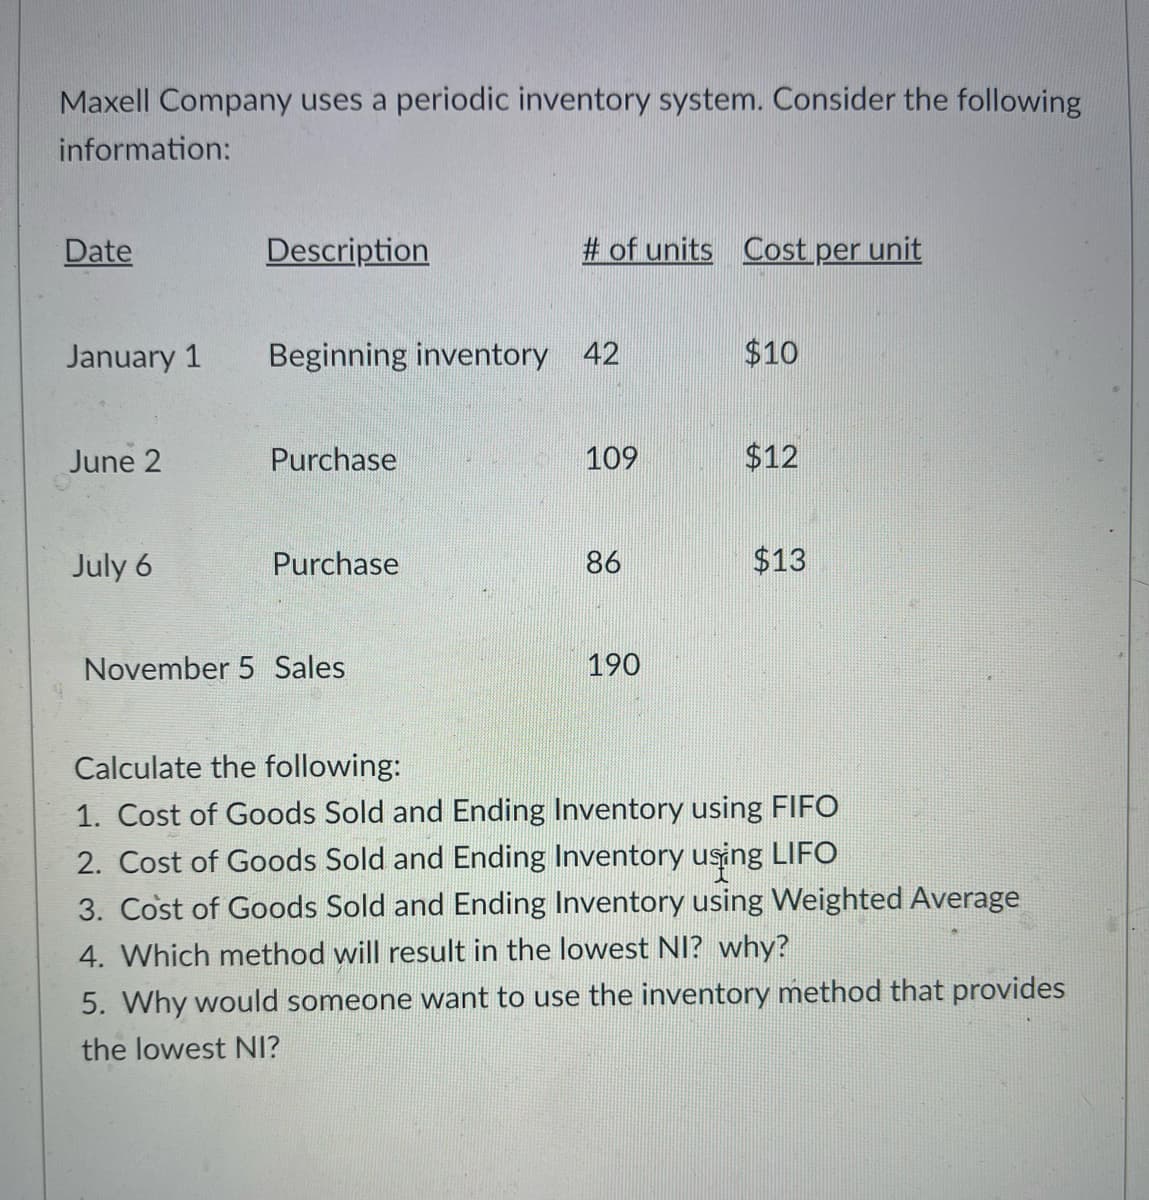 Maxell Company uses a periodic inventory system. Consider the following
information:
Date
June 2
Description
January 1 Beginning inventory 42
July 6
Purchase
Purchase
# of units Cost per unit
November 5 Sales
109
86
190
$10
$12
$13
Calculate the following:
1. Cost of Goods Sold and Ending Inventory using FIFO
2. Cost of Goods Sold and Ending Inventory using LIFO
3. Cost of Goods Sold and Ending Inventory using Weighted Average
4. Which method will result in the lowest NI? why?
5. Why would someone want to use the inventory method that provides
the lowest NI?